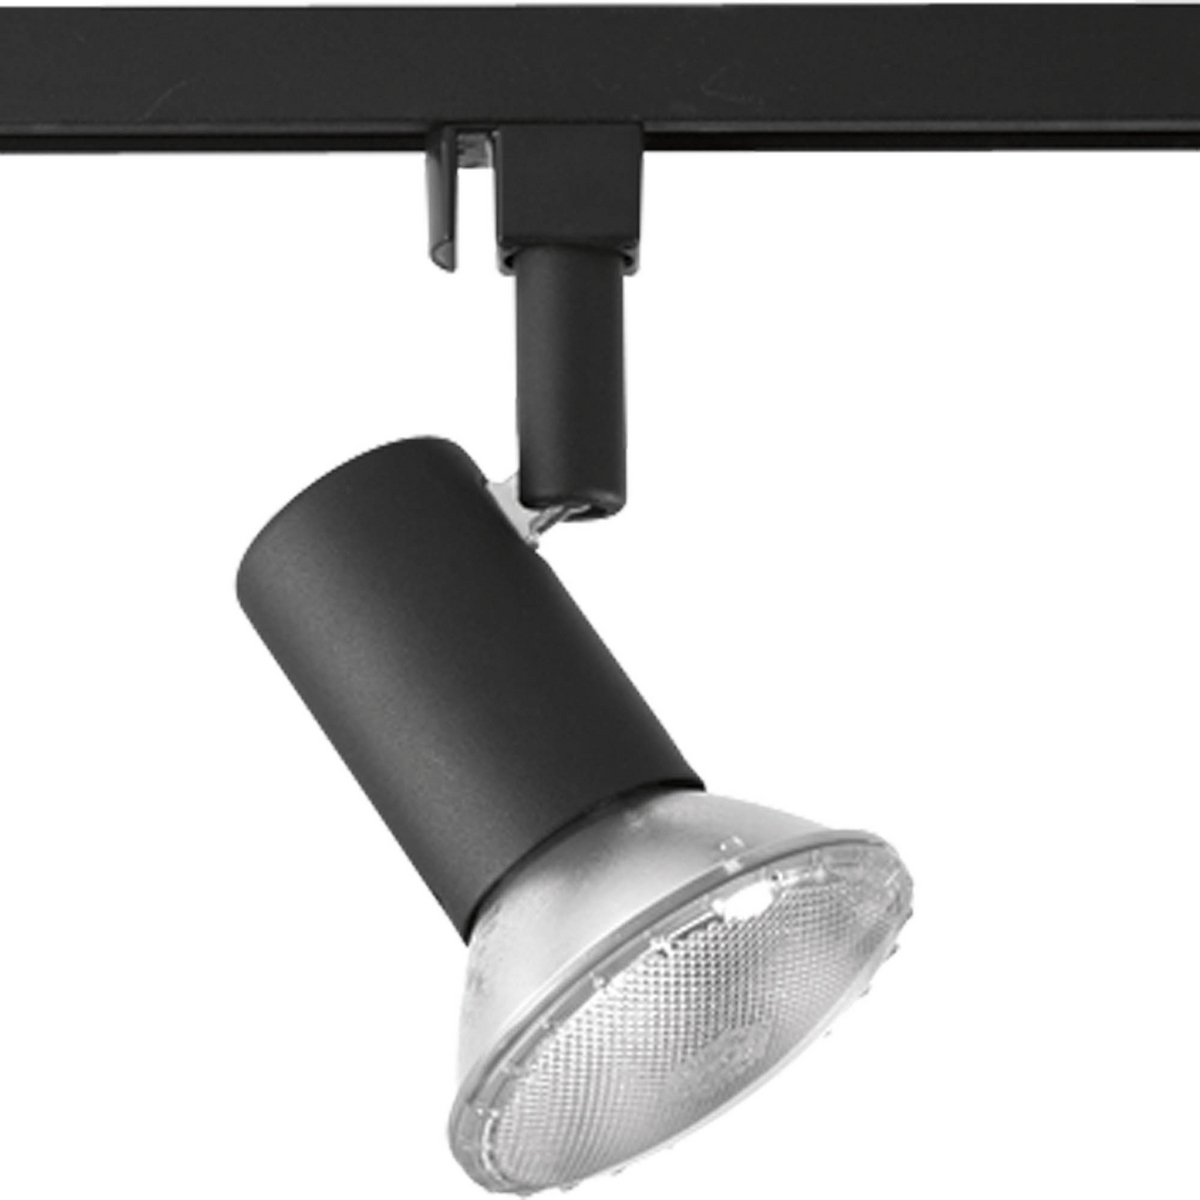 Simple design of this Alpha Trak head provides minimal obtrusion into the visual space. Lampholder rotates 360 horizontally and 90 degree vertically. Heads can be easily repositioned on the track to provide lighting in different areas of the room. Universal track head accepts any medium base PAR, BR, or R lamp except PAR30 short neck. Black finish.